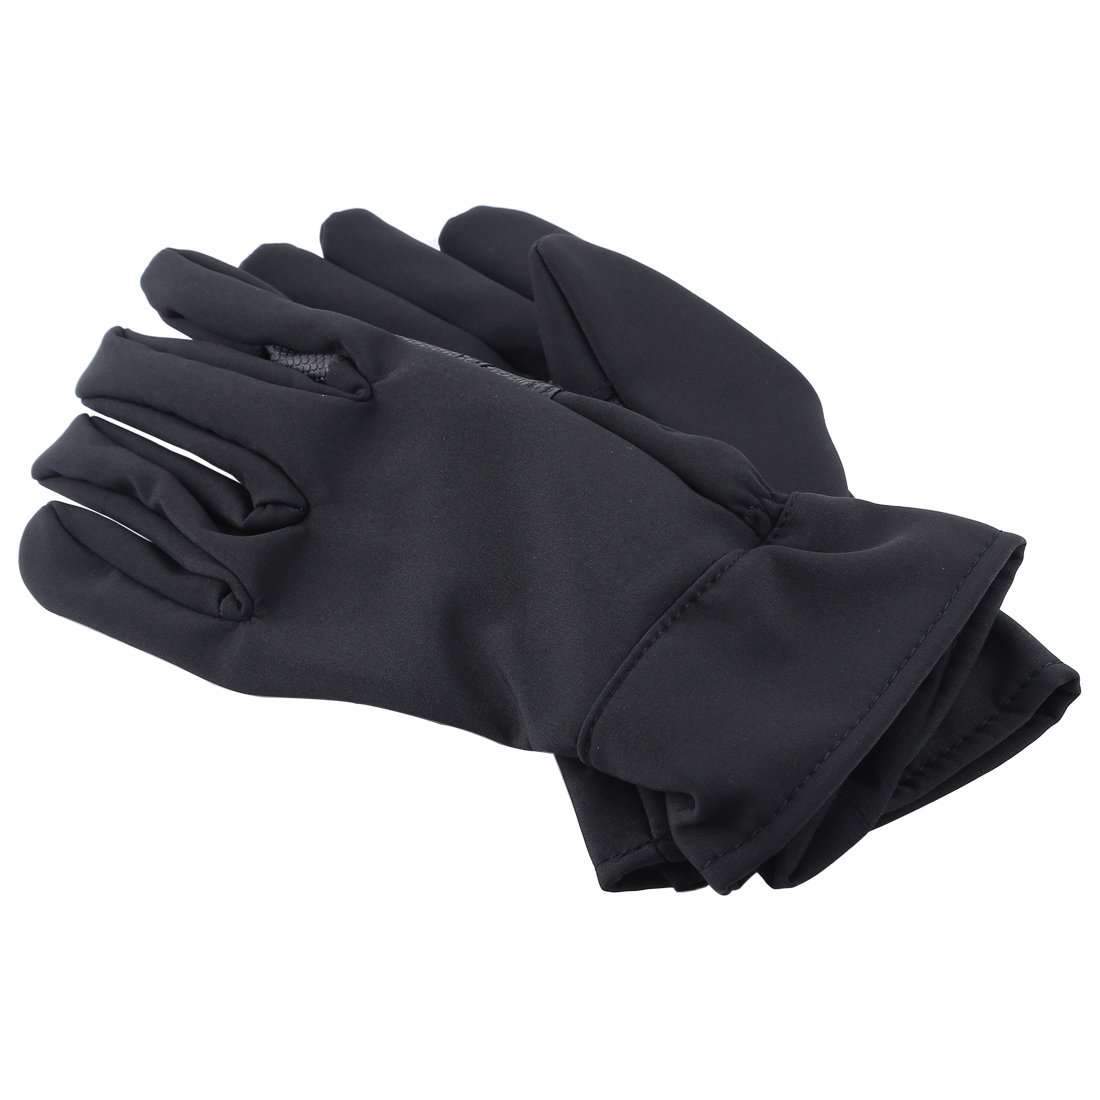 AMZER Outdoor Sports Wind-stopper Full Finger Winter Warm Photography